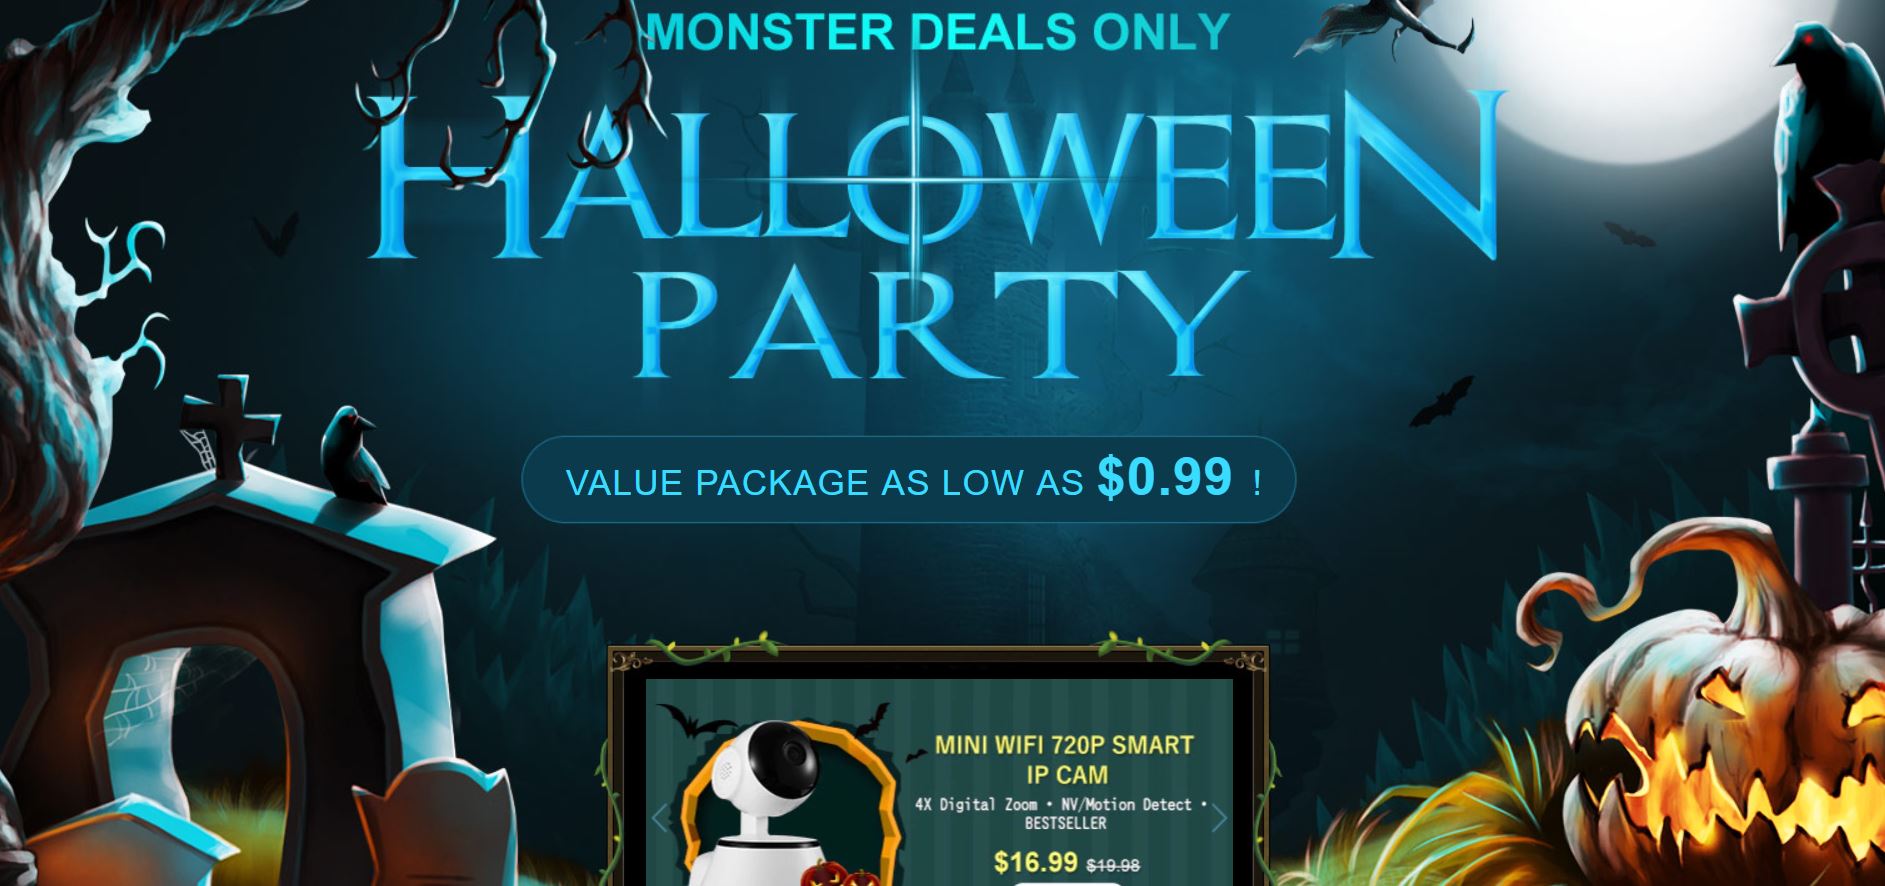 GearBest Halloween Party Gear Flash Sale Best Offers and Coupon Code 5